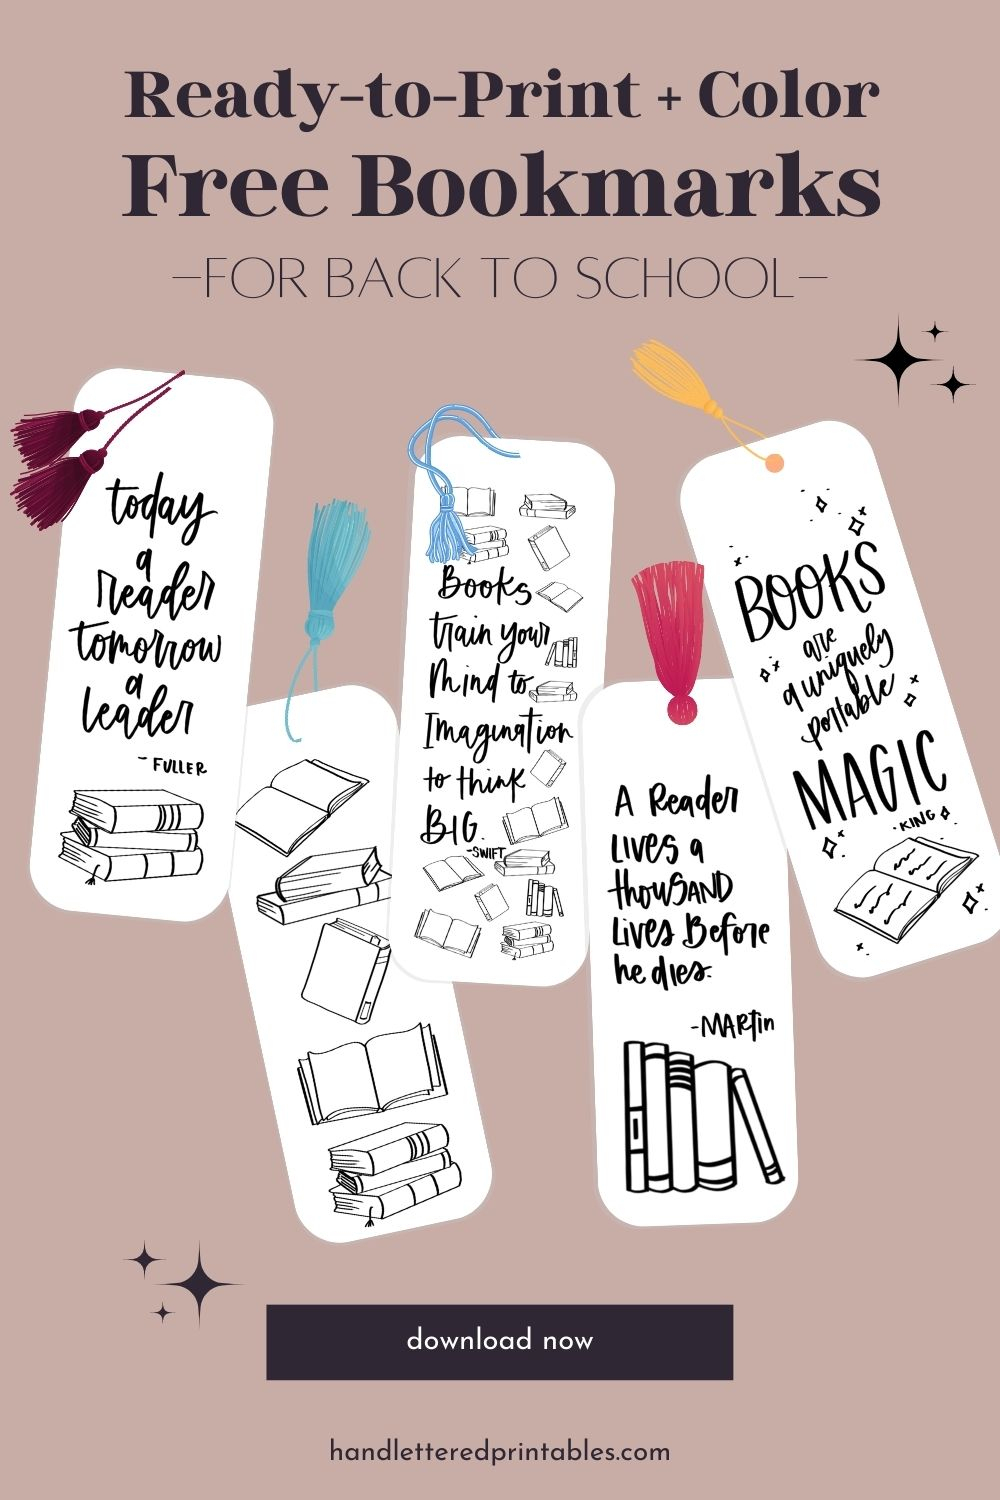 Free Printable Back To School Bookmarks - Hand Lettered Printables - Free Printable Educational Bookmarks